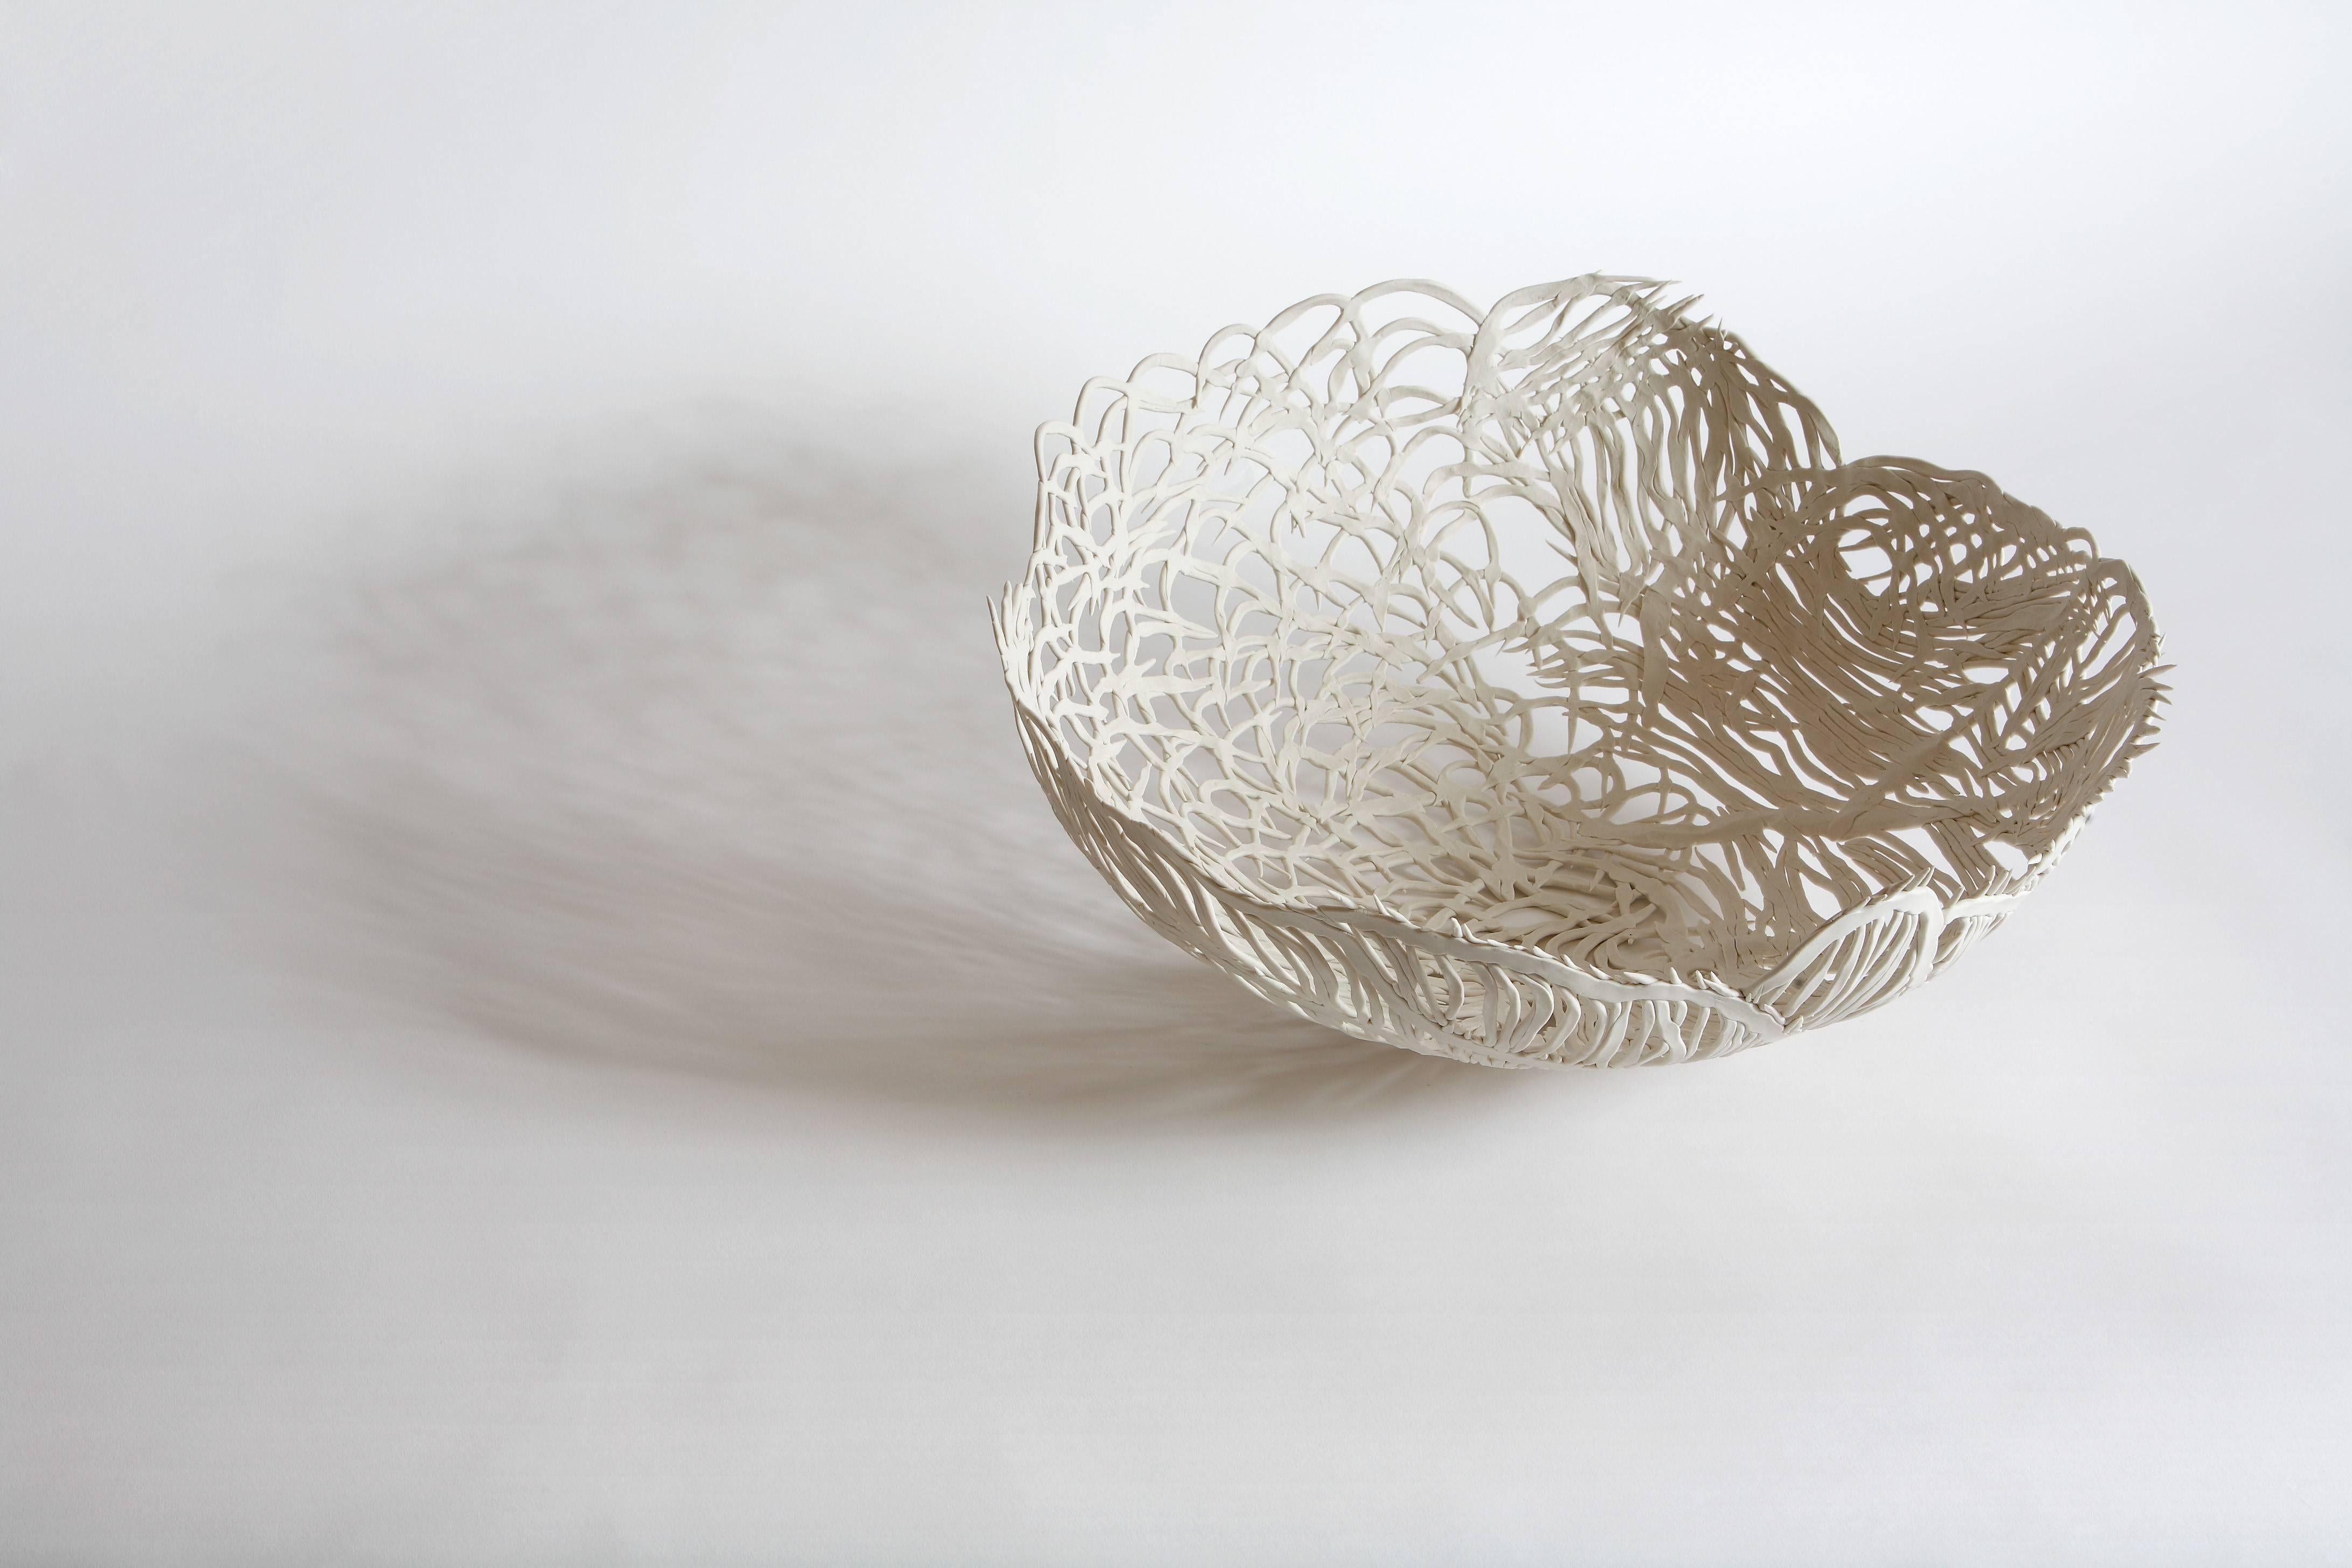 French artist Nathalie Derouet looks to play on light and translucency with the delicate handmade ceramic lace bowl. 

The inspiration behind these pieces are taken from Chinese and Japanese ceramics, countries where refinement and sophistication